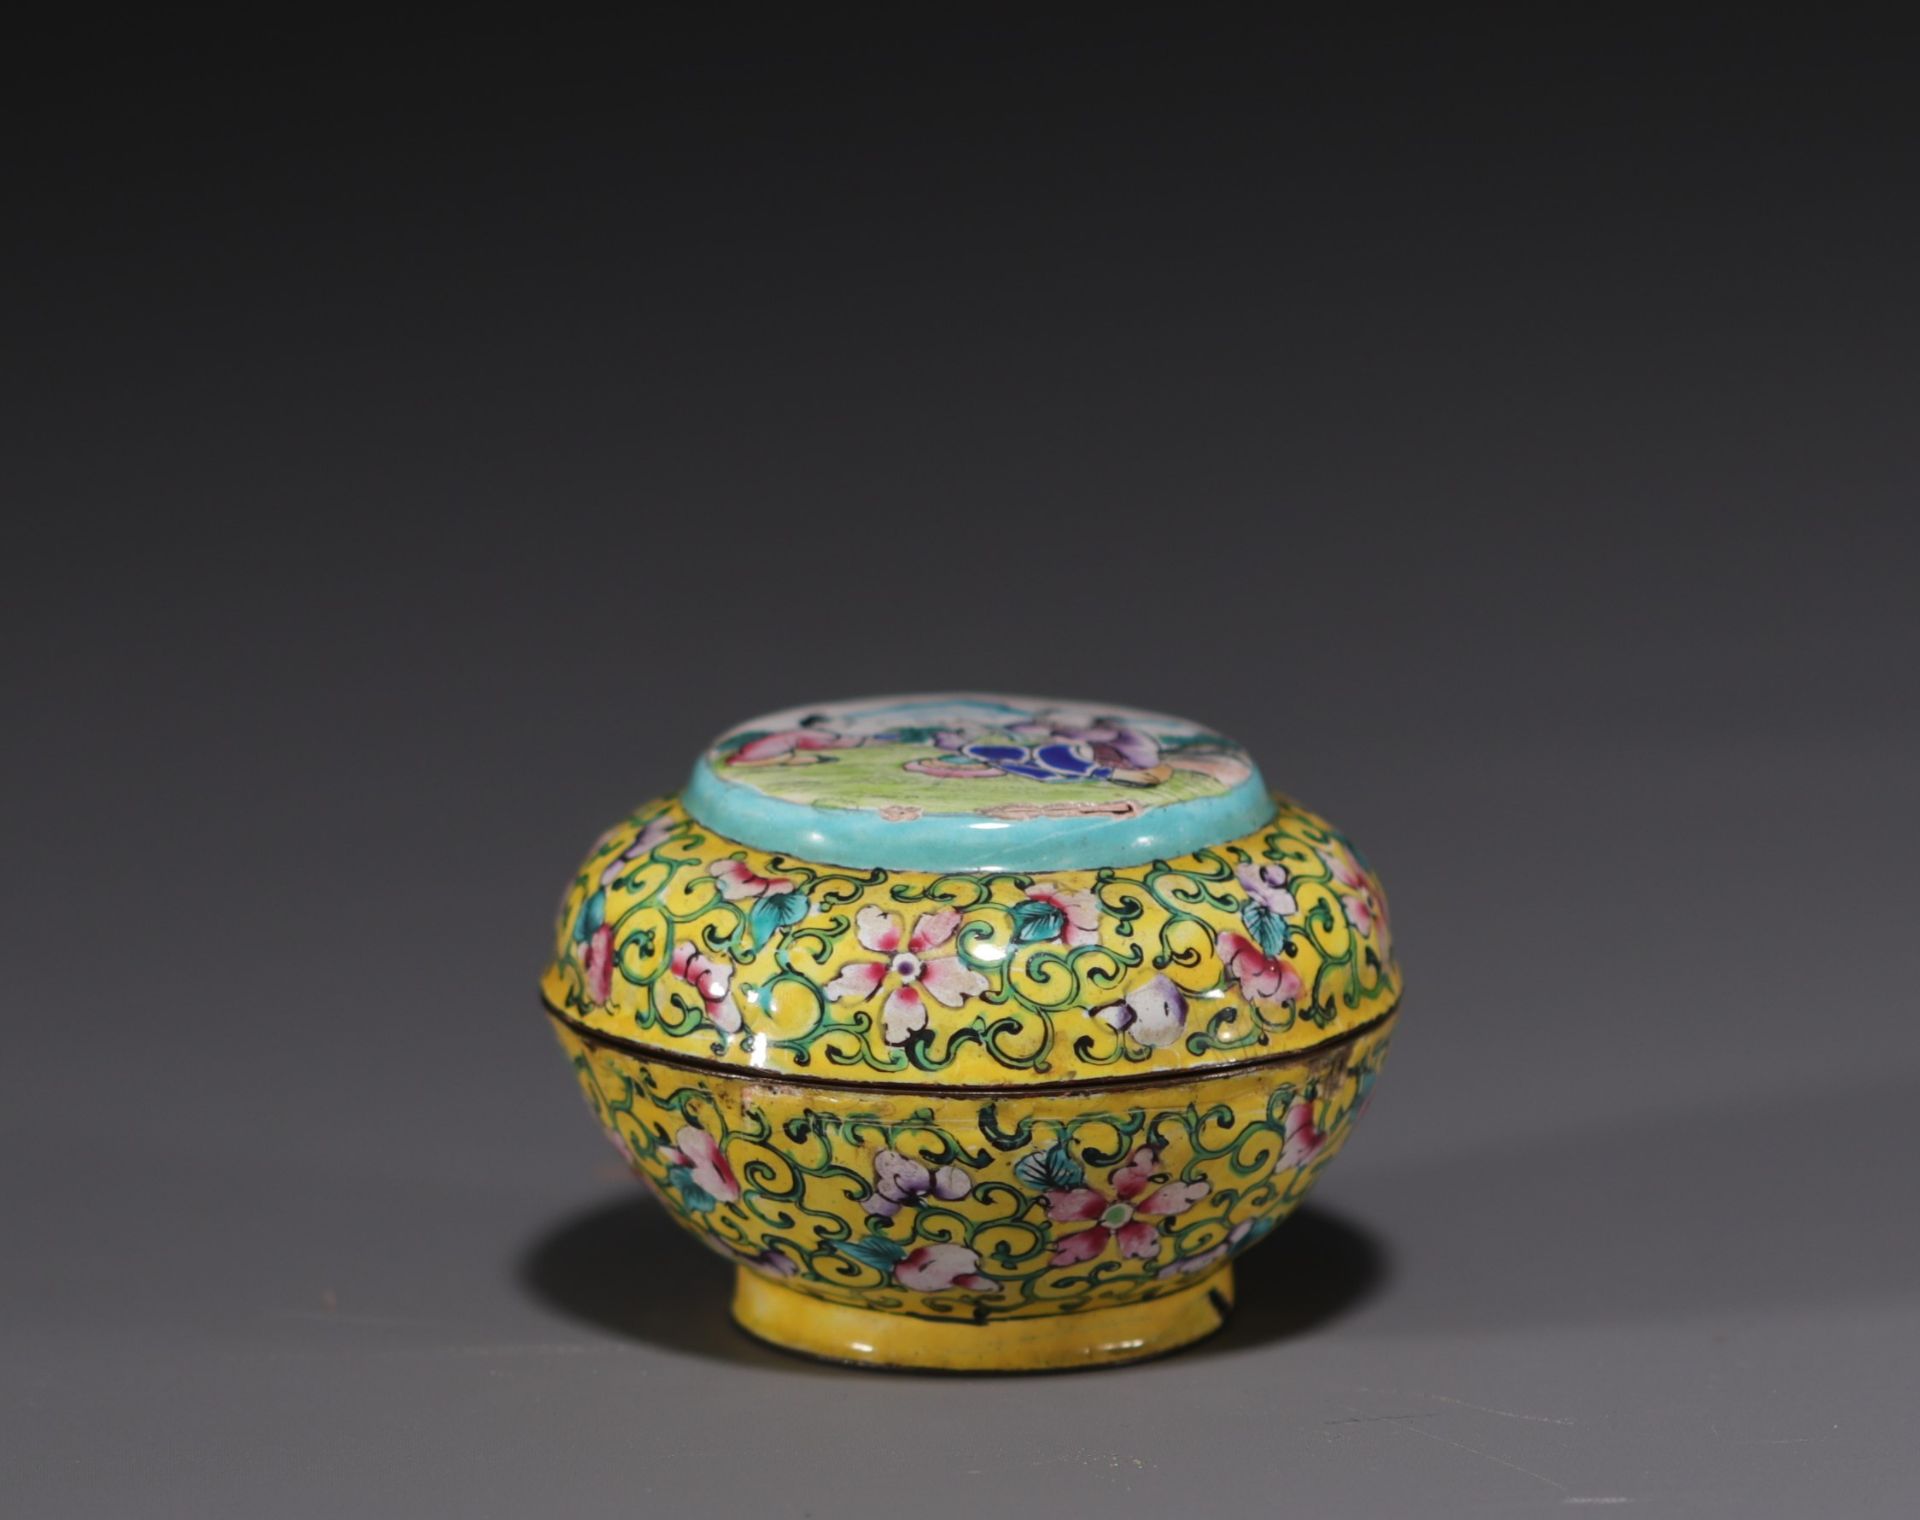 China - Cloisonne enamel box with figures, Canton, 18th-19th century.